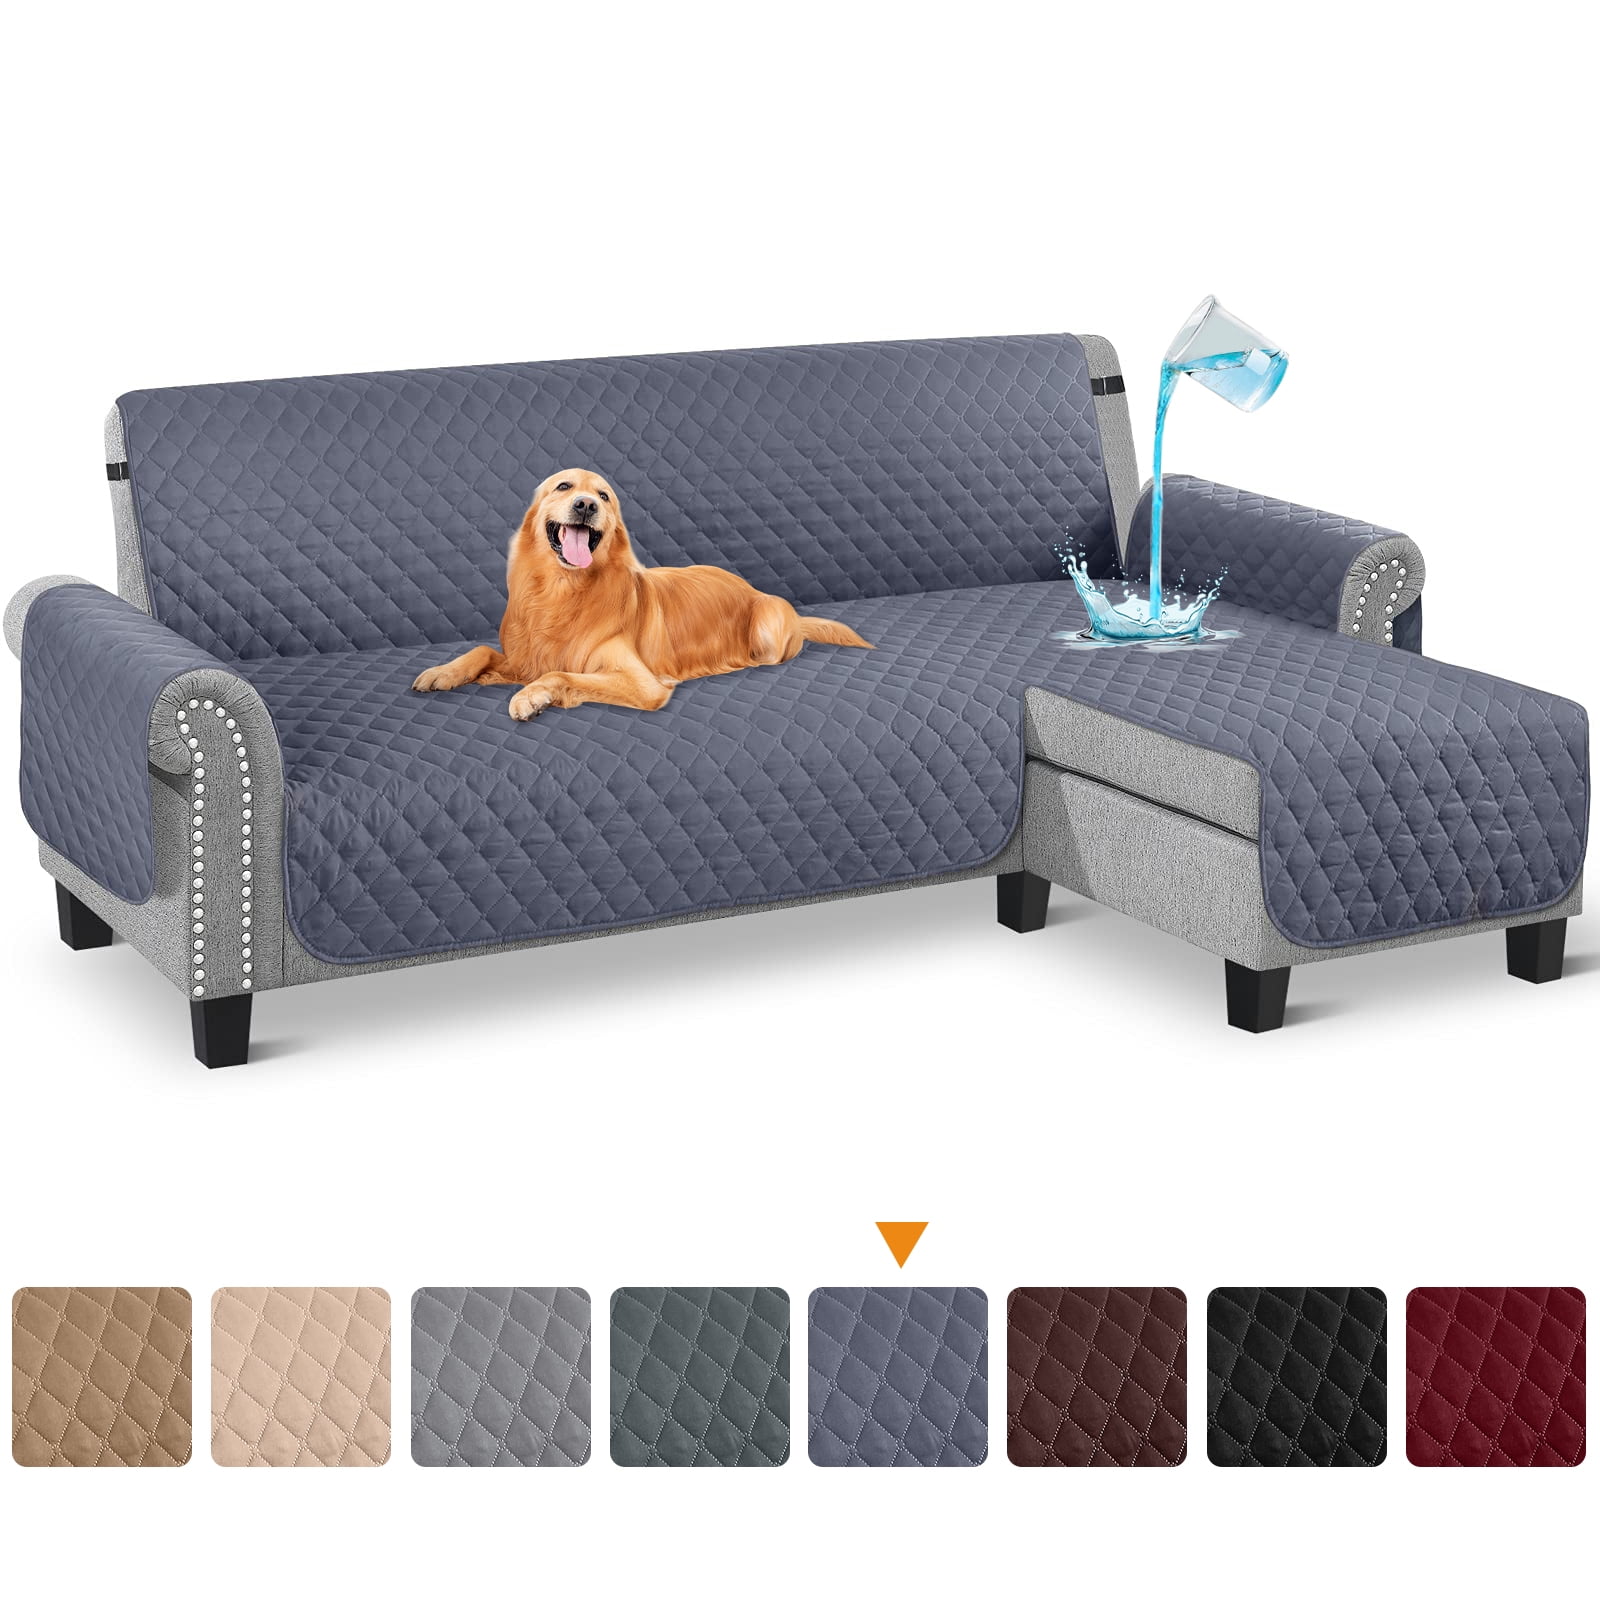 LIANGLAOI Faux Pu Leather Sofa Cover,163% Waterproof Non-Slip Sectional  Couch Cover,Solid Color Sofa Slipcover for Dogs,Children,Pets Furniture